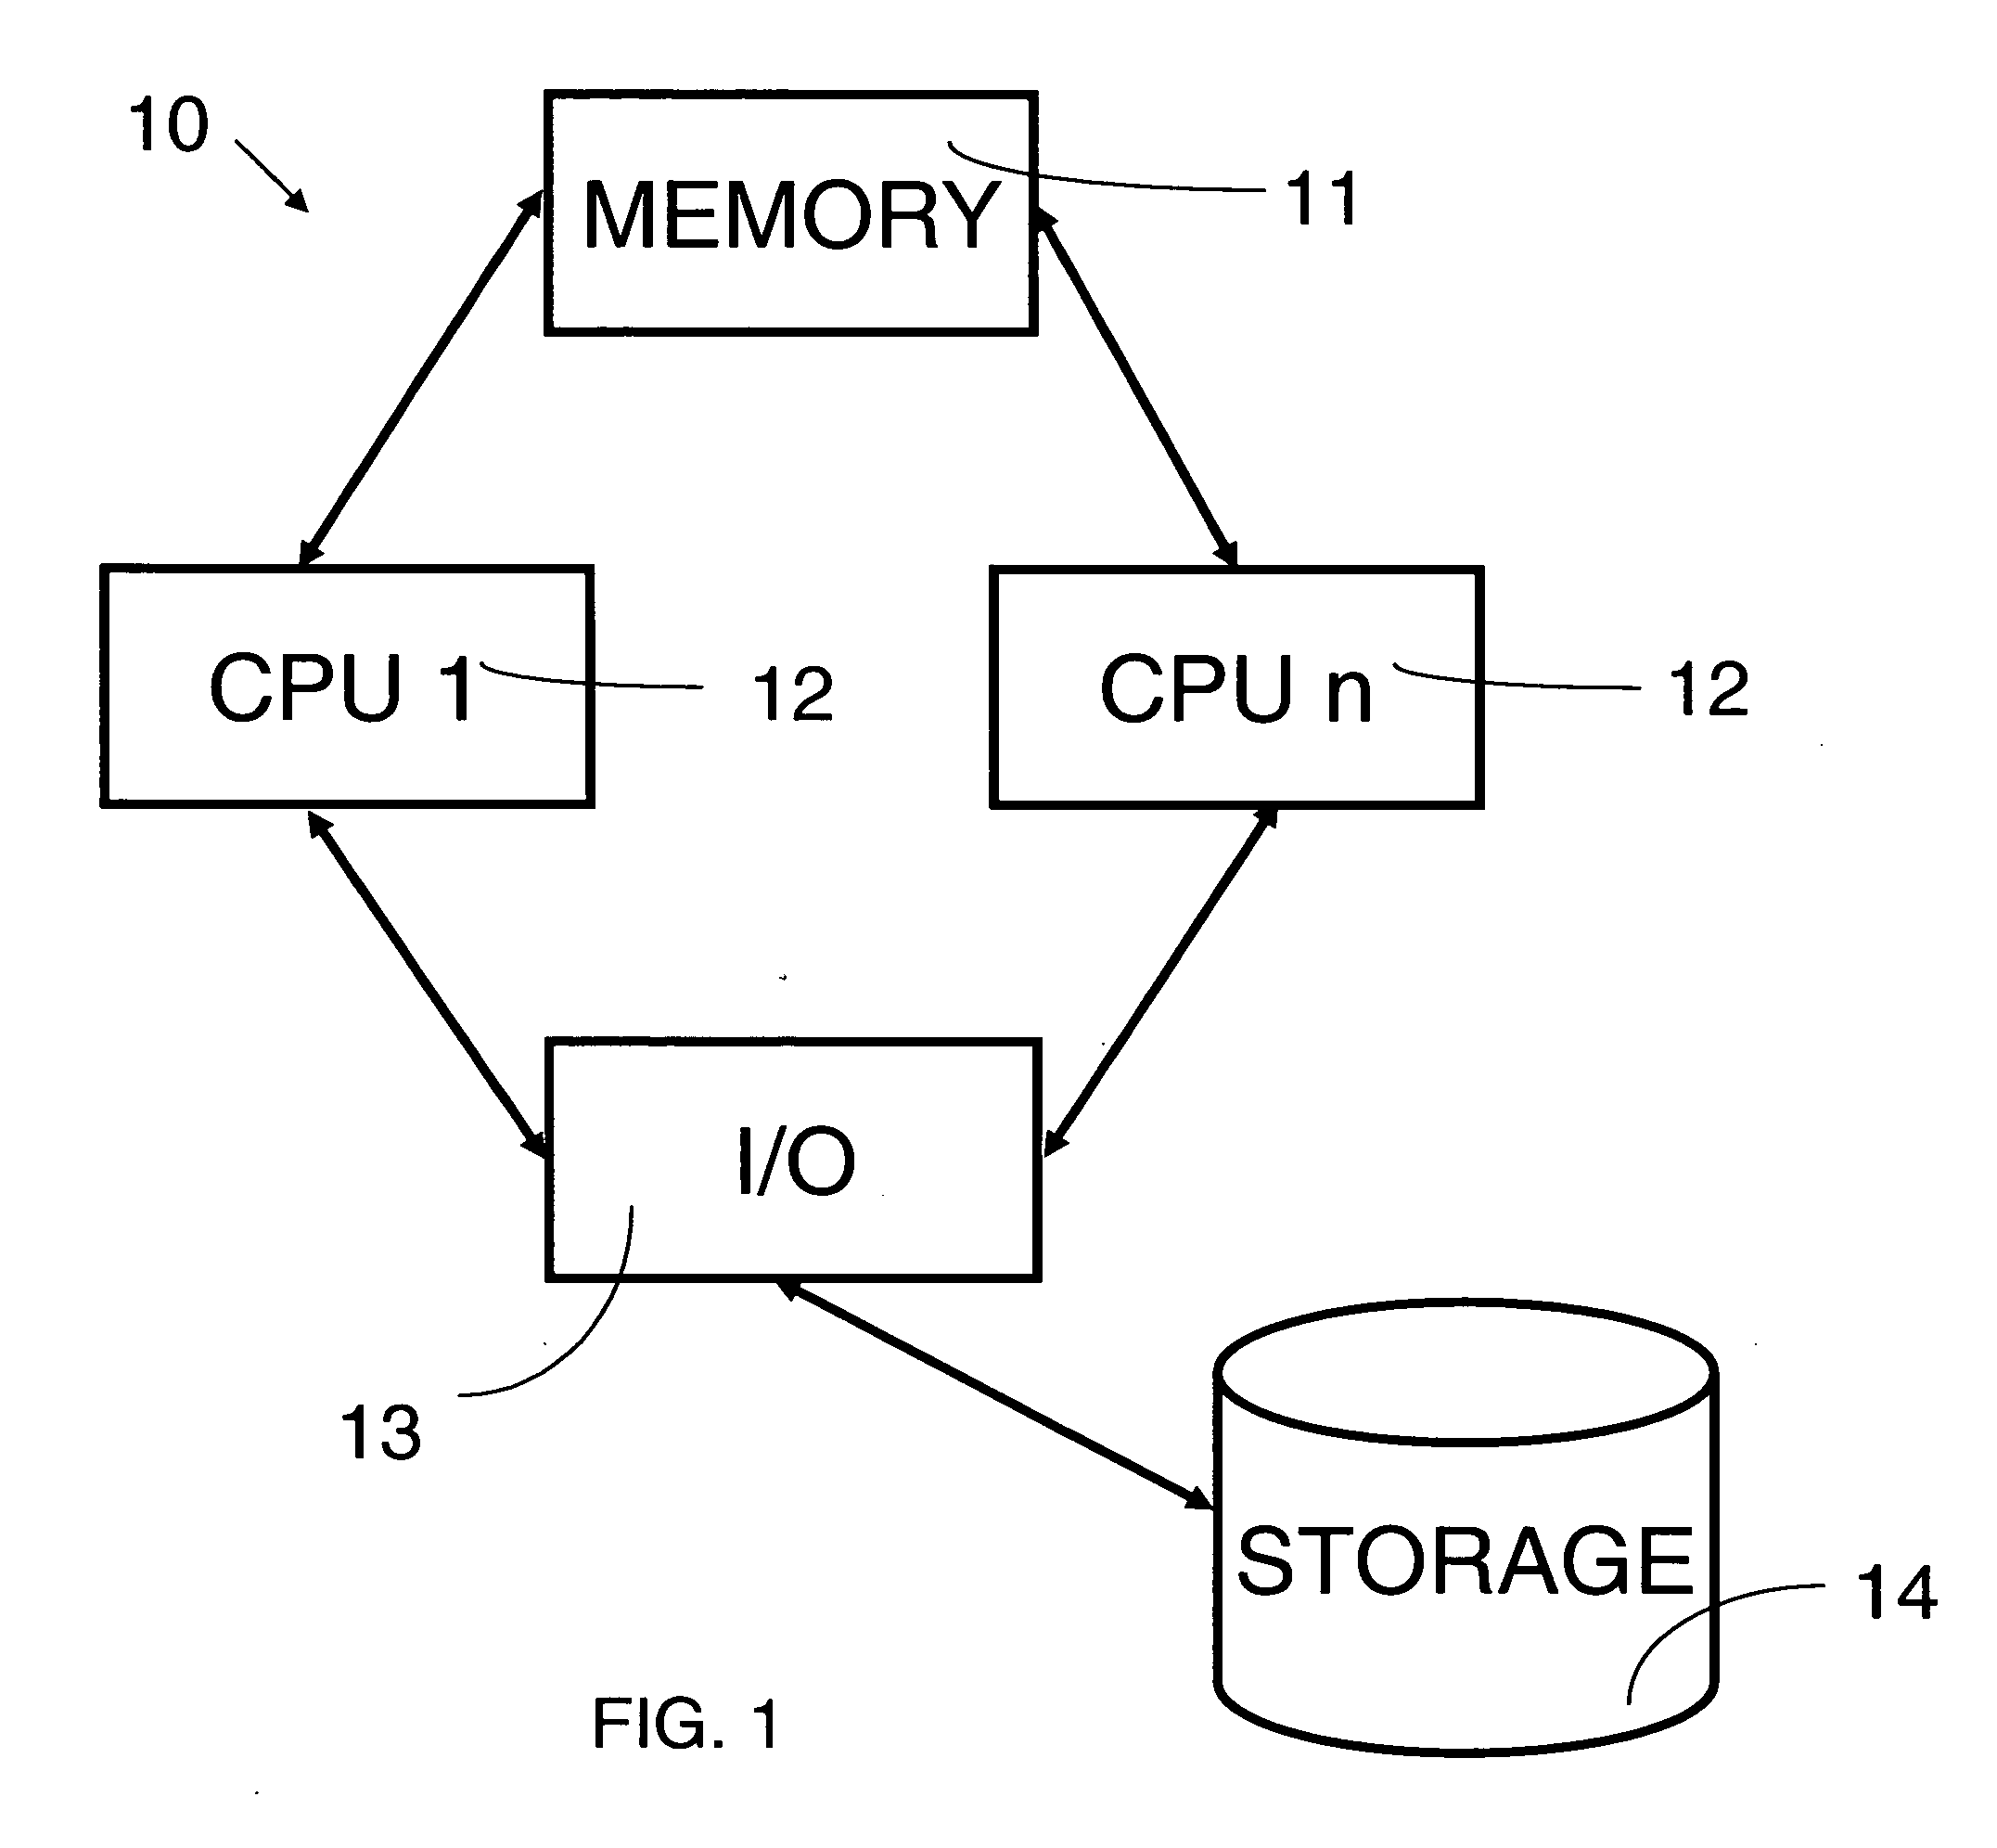 Method and system for generating and applying patches to a computer program concurrently with its execution